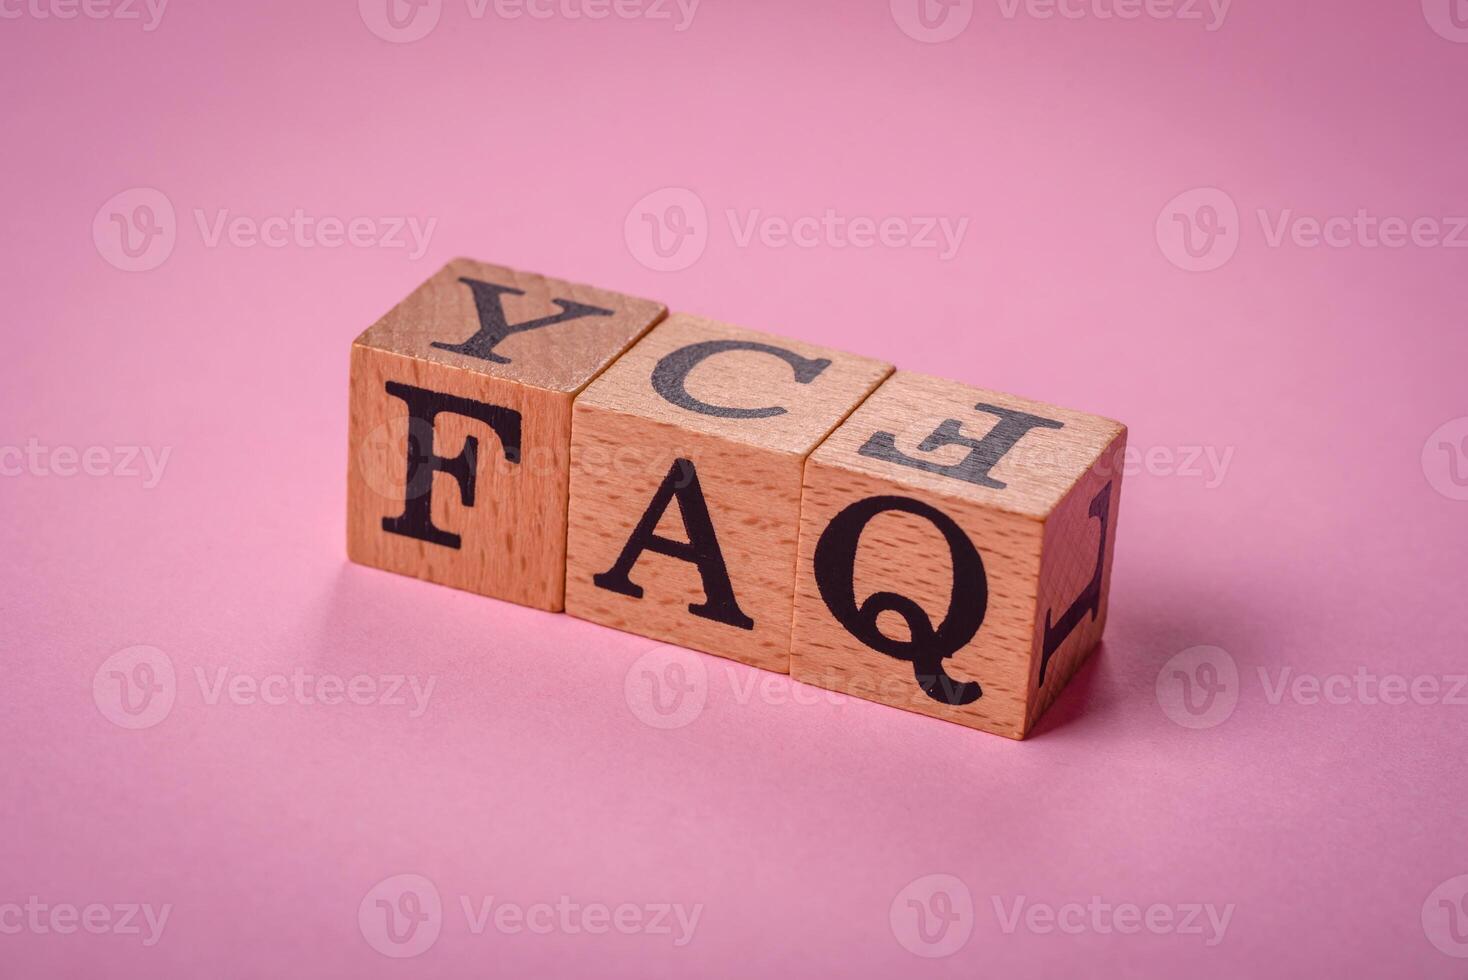 The inscription FAQ made up of wooden cubes on a plain background photo